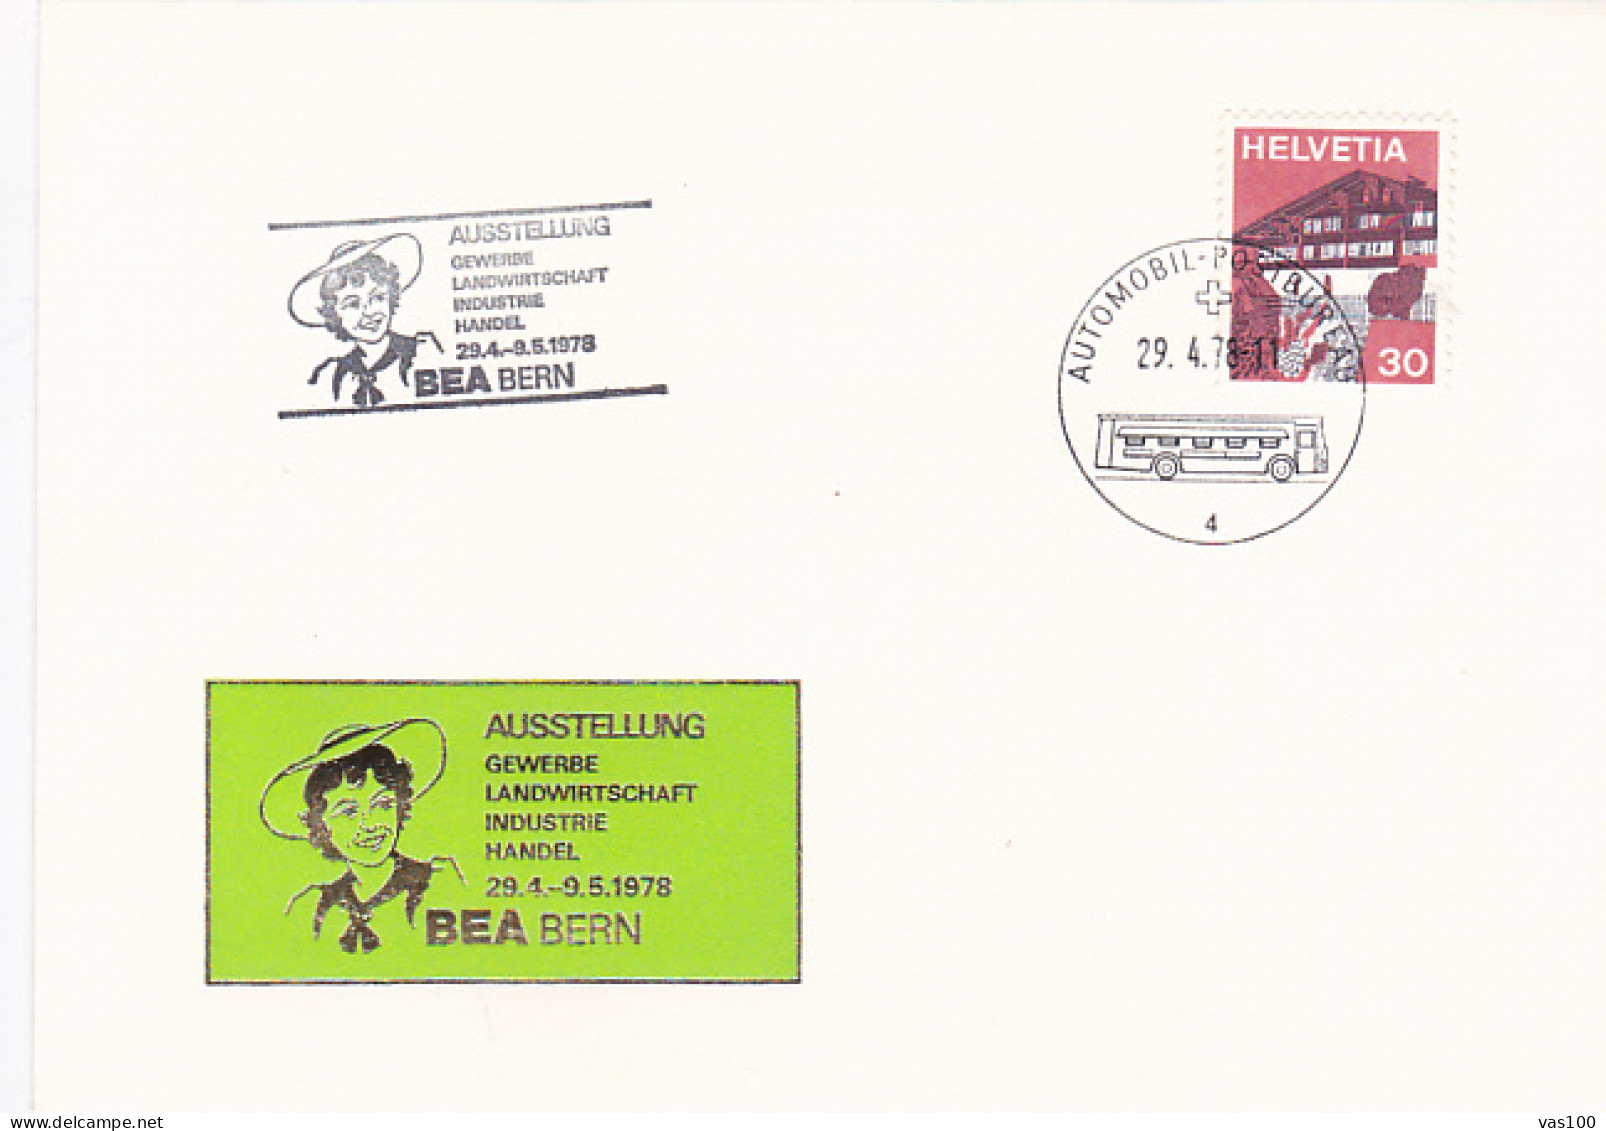 TRANSPORT, BUSS, MOBILE POST OFFICE POSTAMRK ON EXHIBITION SPECIAL COVER, 1978, SWITZERLAND - Busses